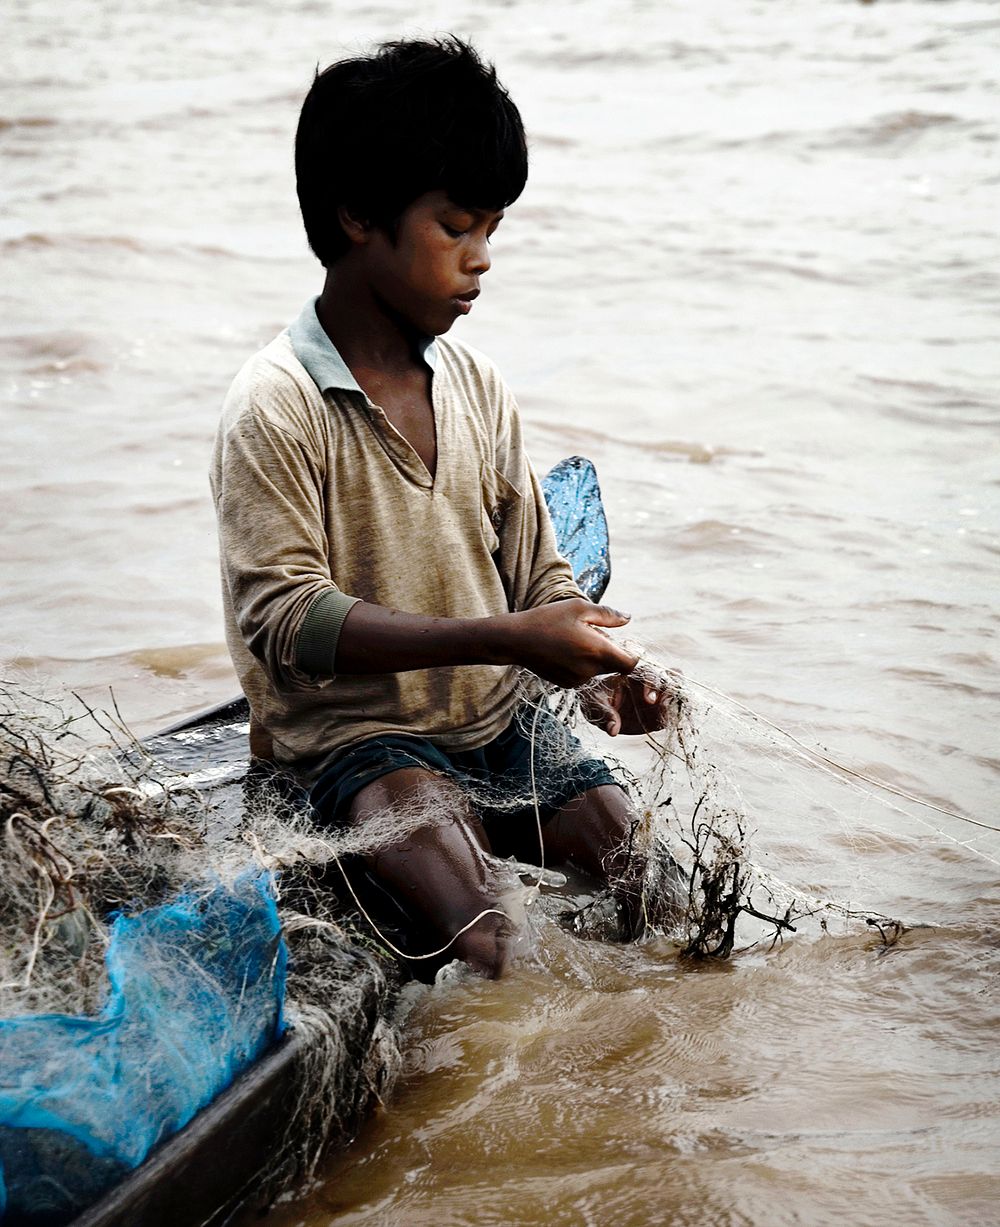 Cambodian boy fishing in the river